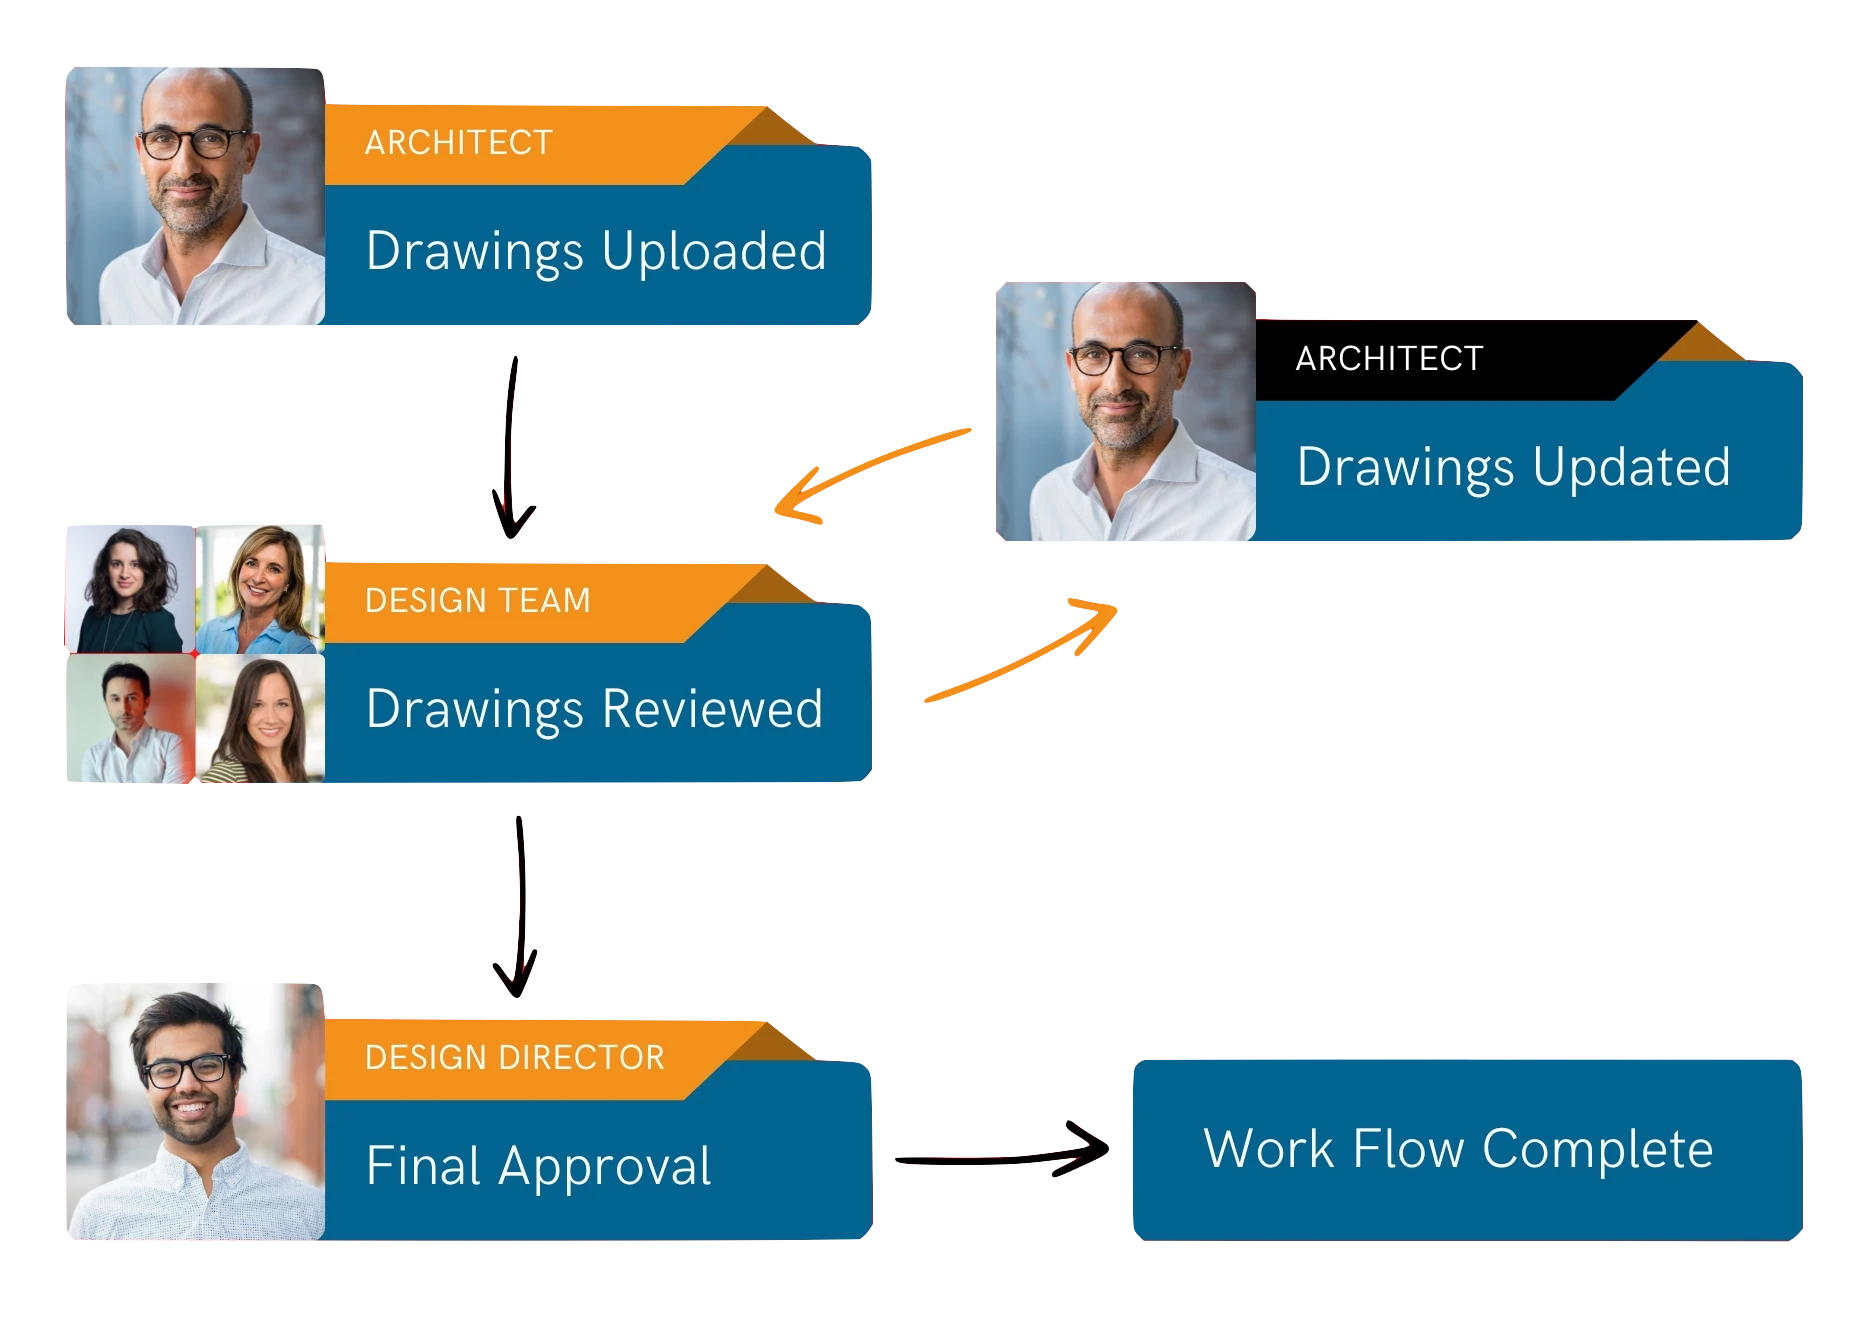 Construction Drawing Approvals<br />
